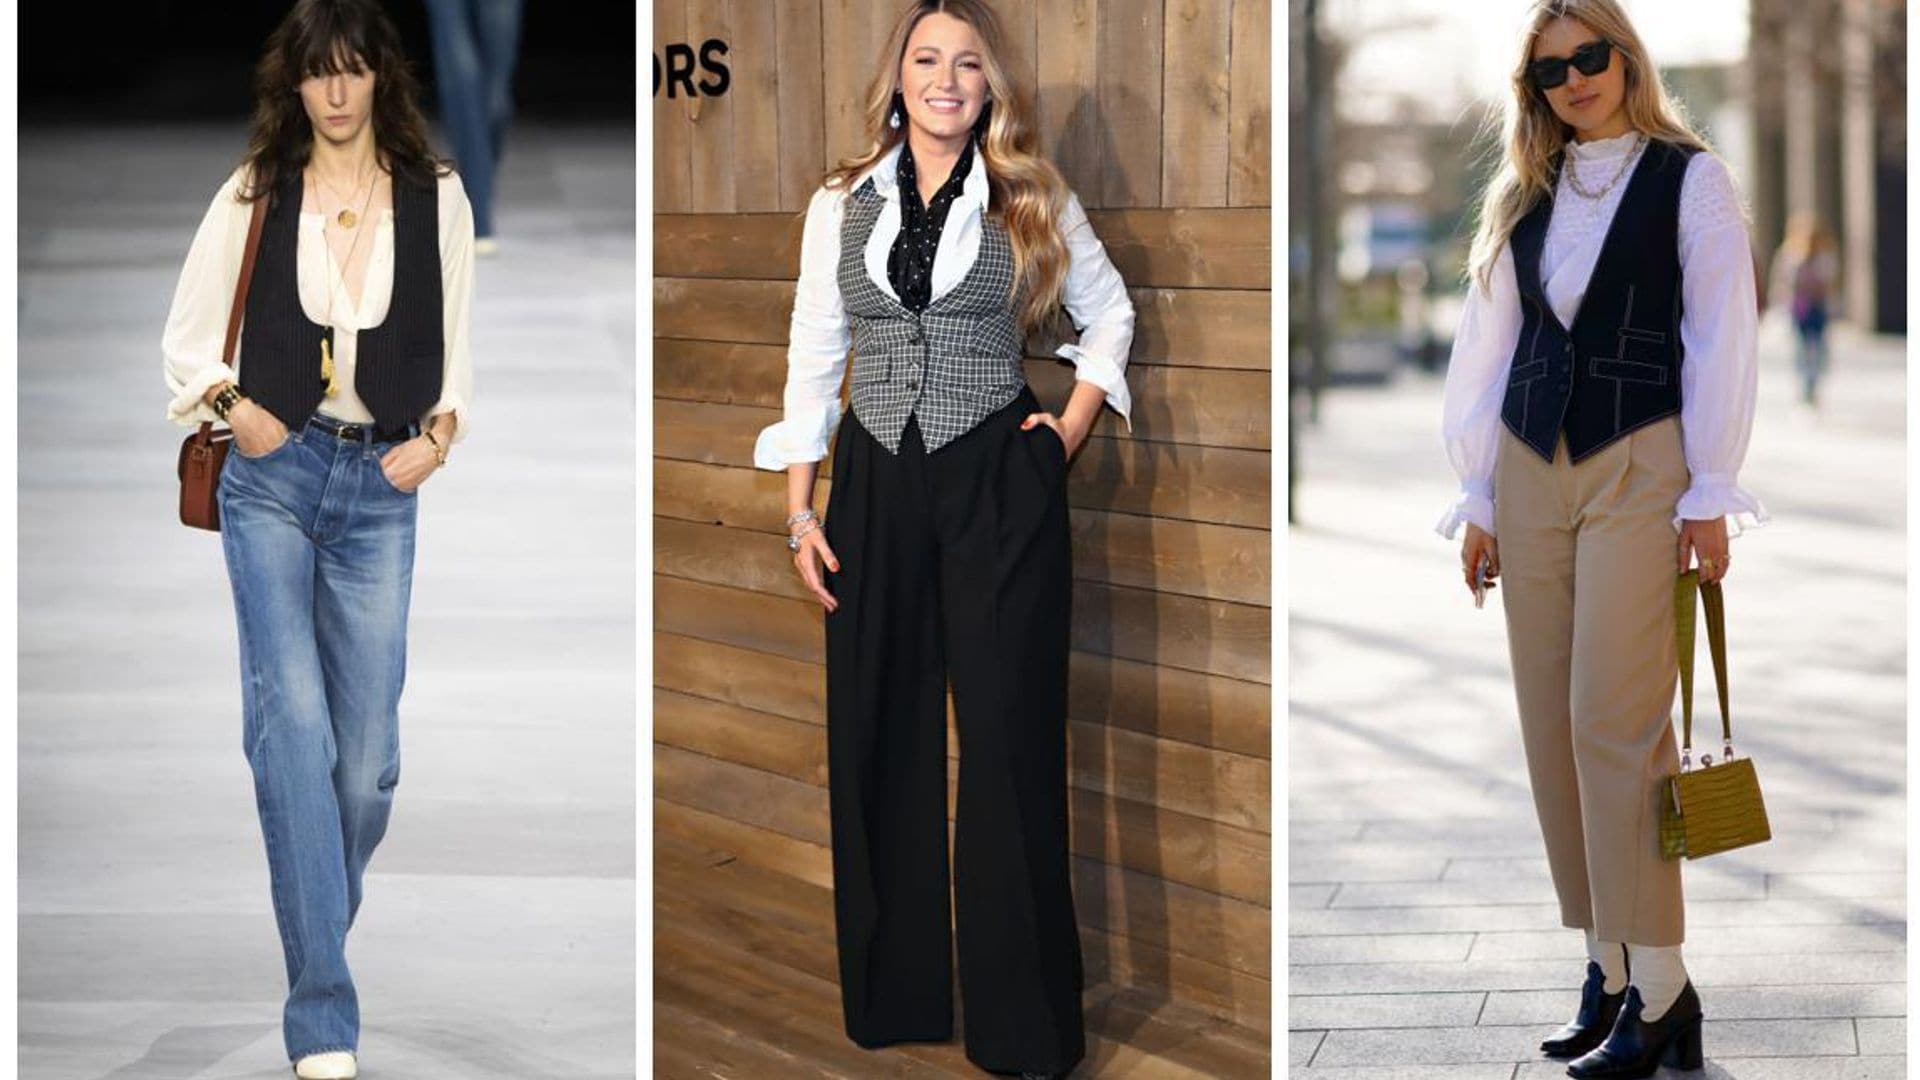 Celine fashion show, Blake Lively, and a street styler, all sporting vests